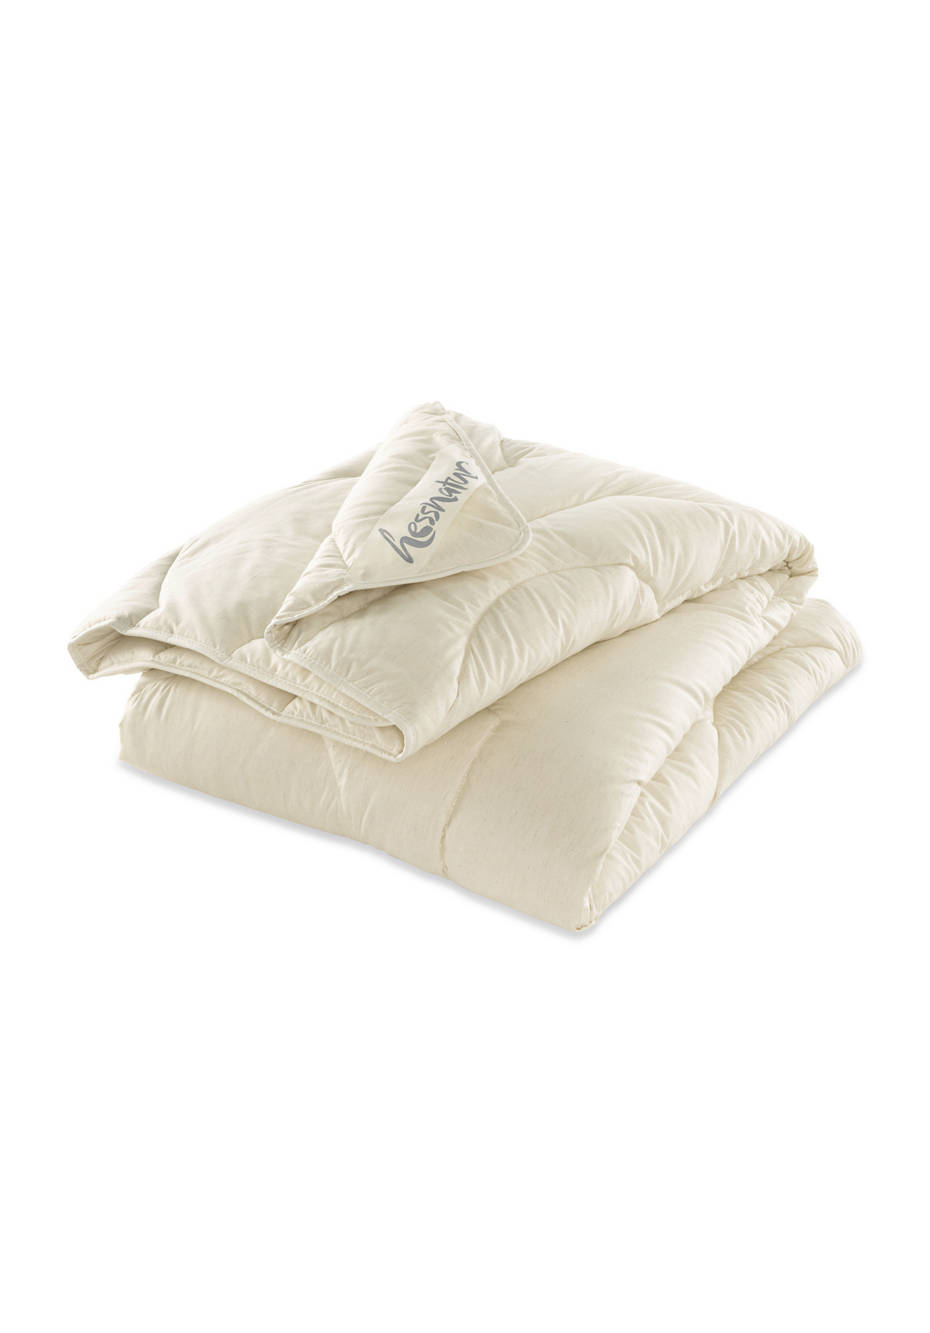 Year-round bedspread linen with organic cotton